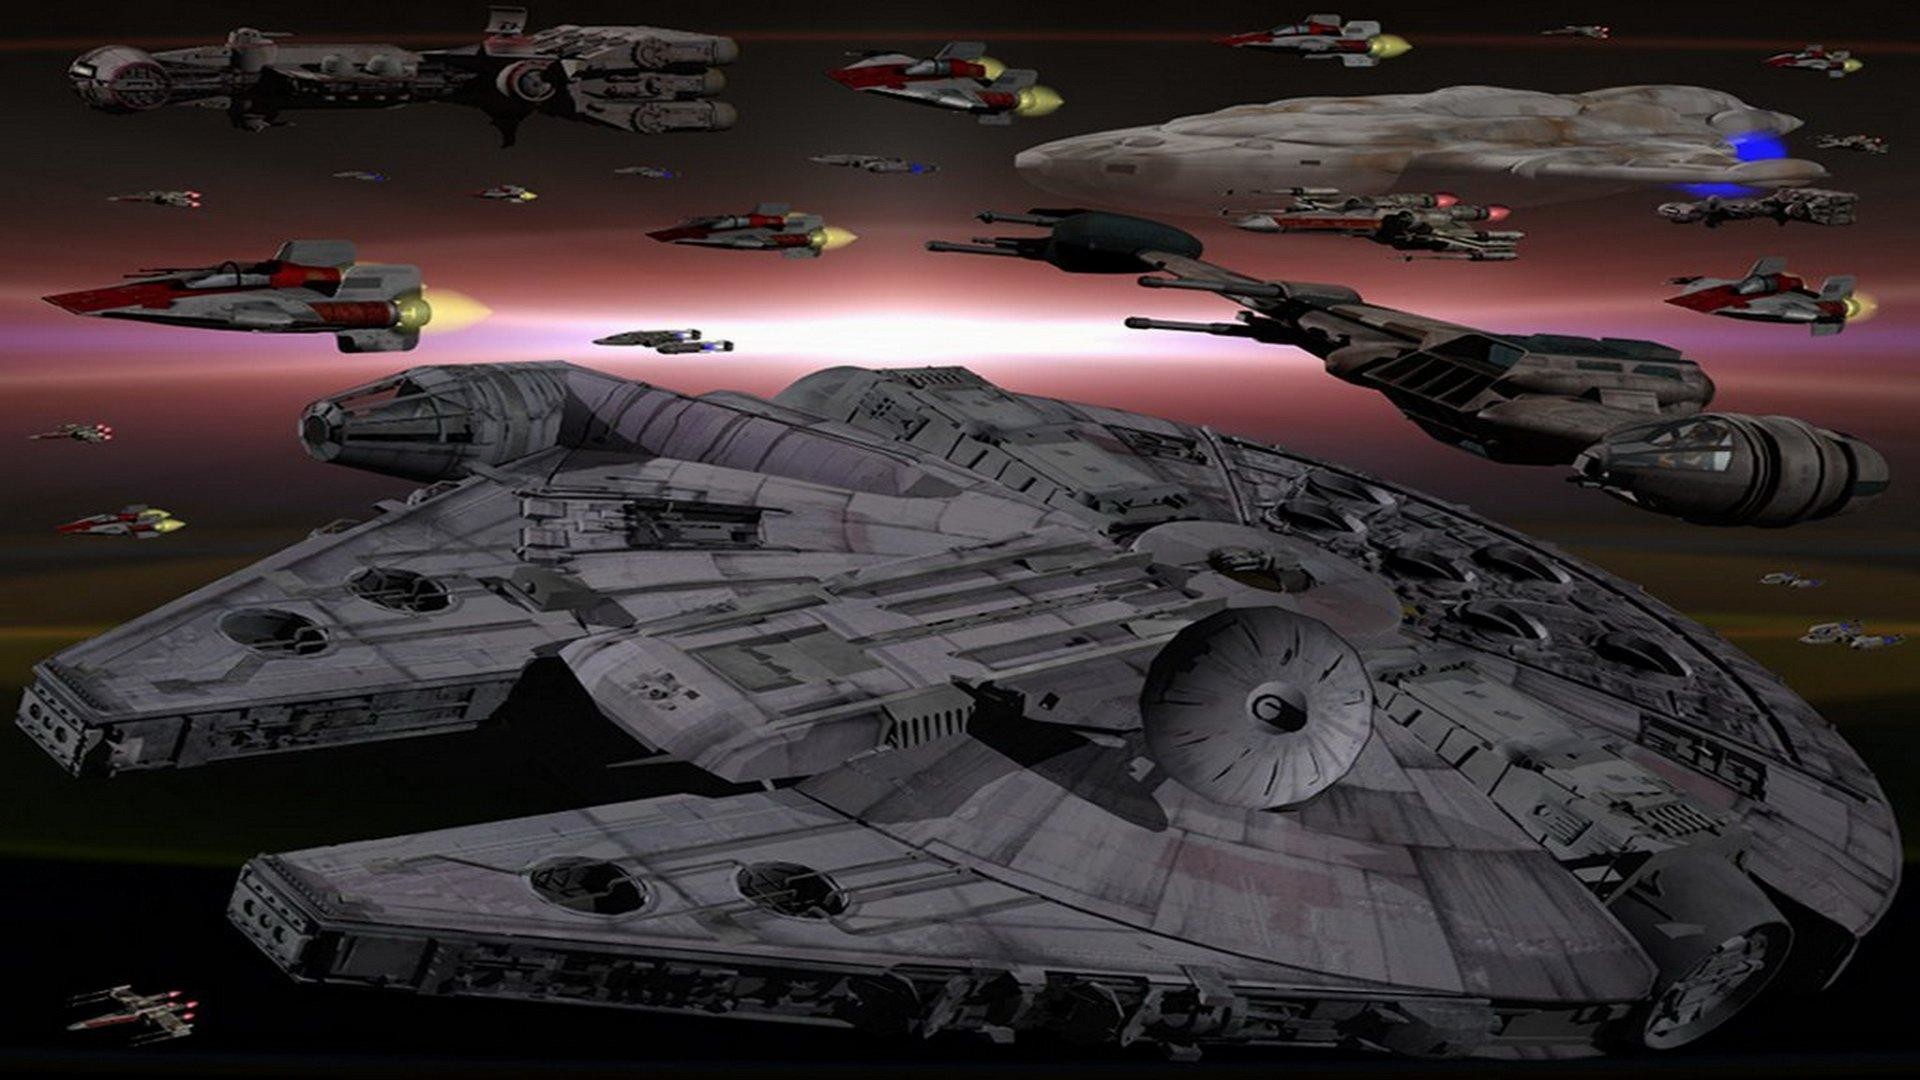 1920x1080 star-wars-movie-imagepages-images-millenium-falcon-1920%